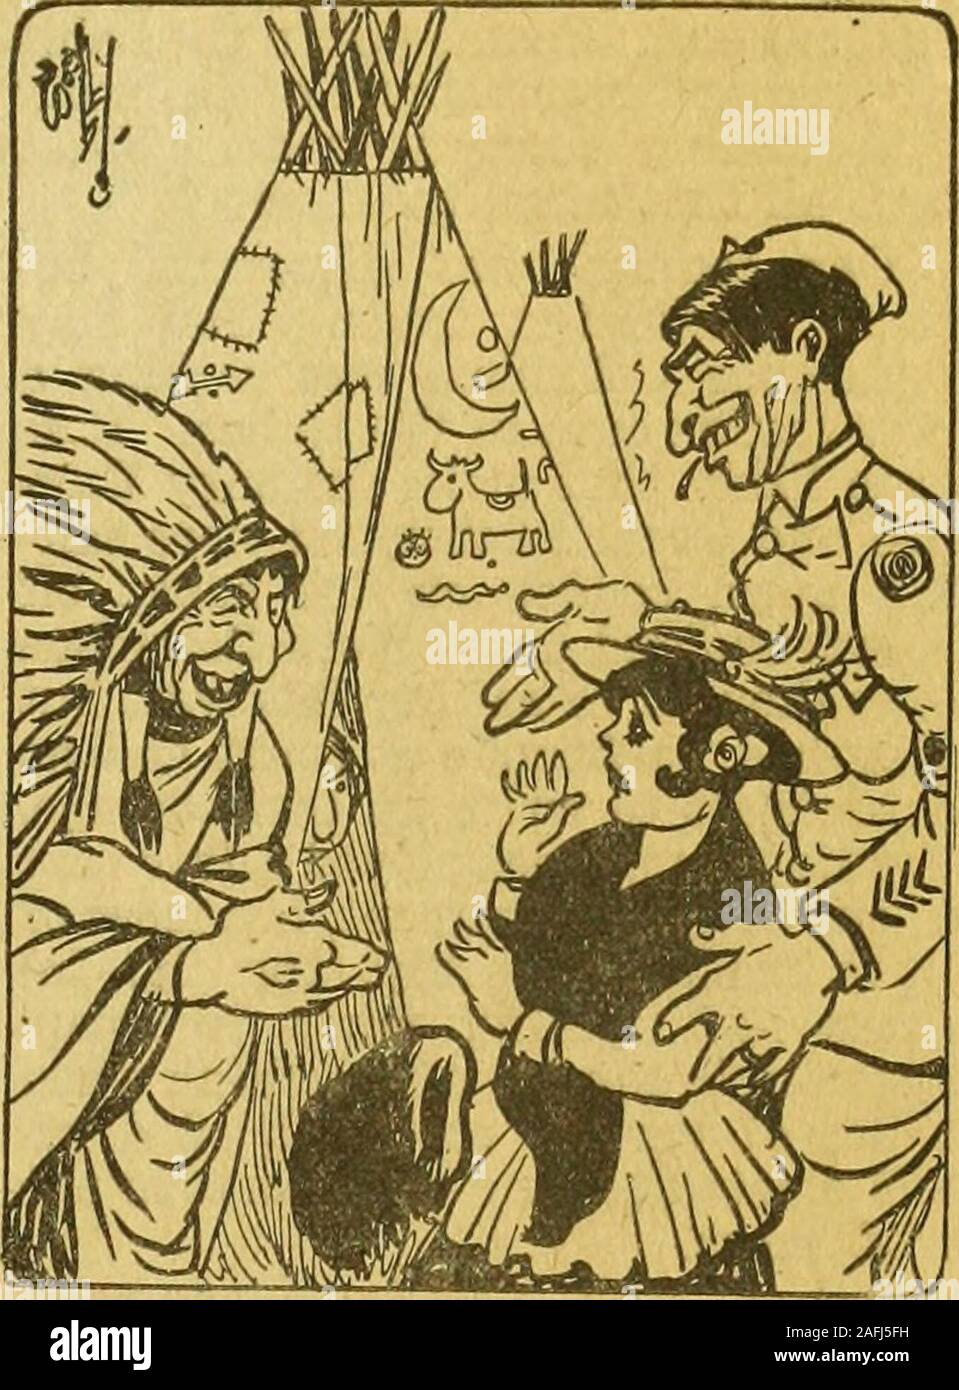 . The American Legion Weekly [Volume 2, No. 15 (May 7, 1920)]. And hes making Injun eyesAt the lady of the place;And she doesnt mind a bit, Or her heart belies her face-In the little cabaret With the rooster on the sign,She is full of love and wonder-He is full of love and wine!. And shed better watch her step, For she isnt flirting nowWith an ordinary Yank She could regulate somehow;Arid if White Bear likes her style, In his savage Red Mans way,Shell be saying Au Revoir To her little French cafe! For the Chief is not a flirt, Never kissed the blarney-stone; When he grabs her by the hair, That Stock Photo